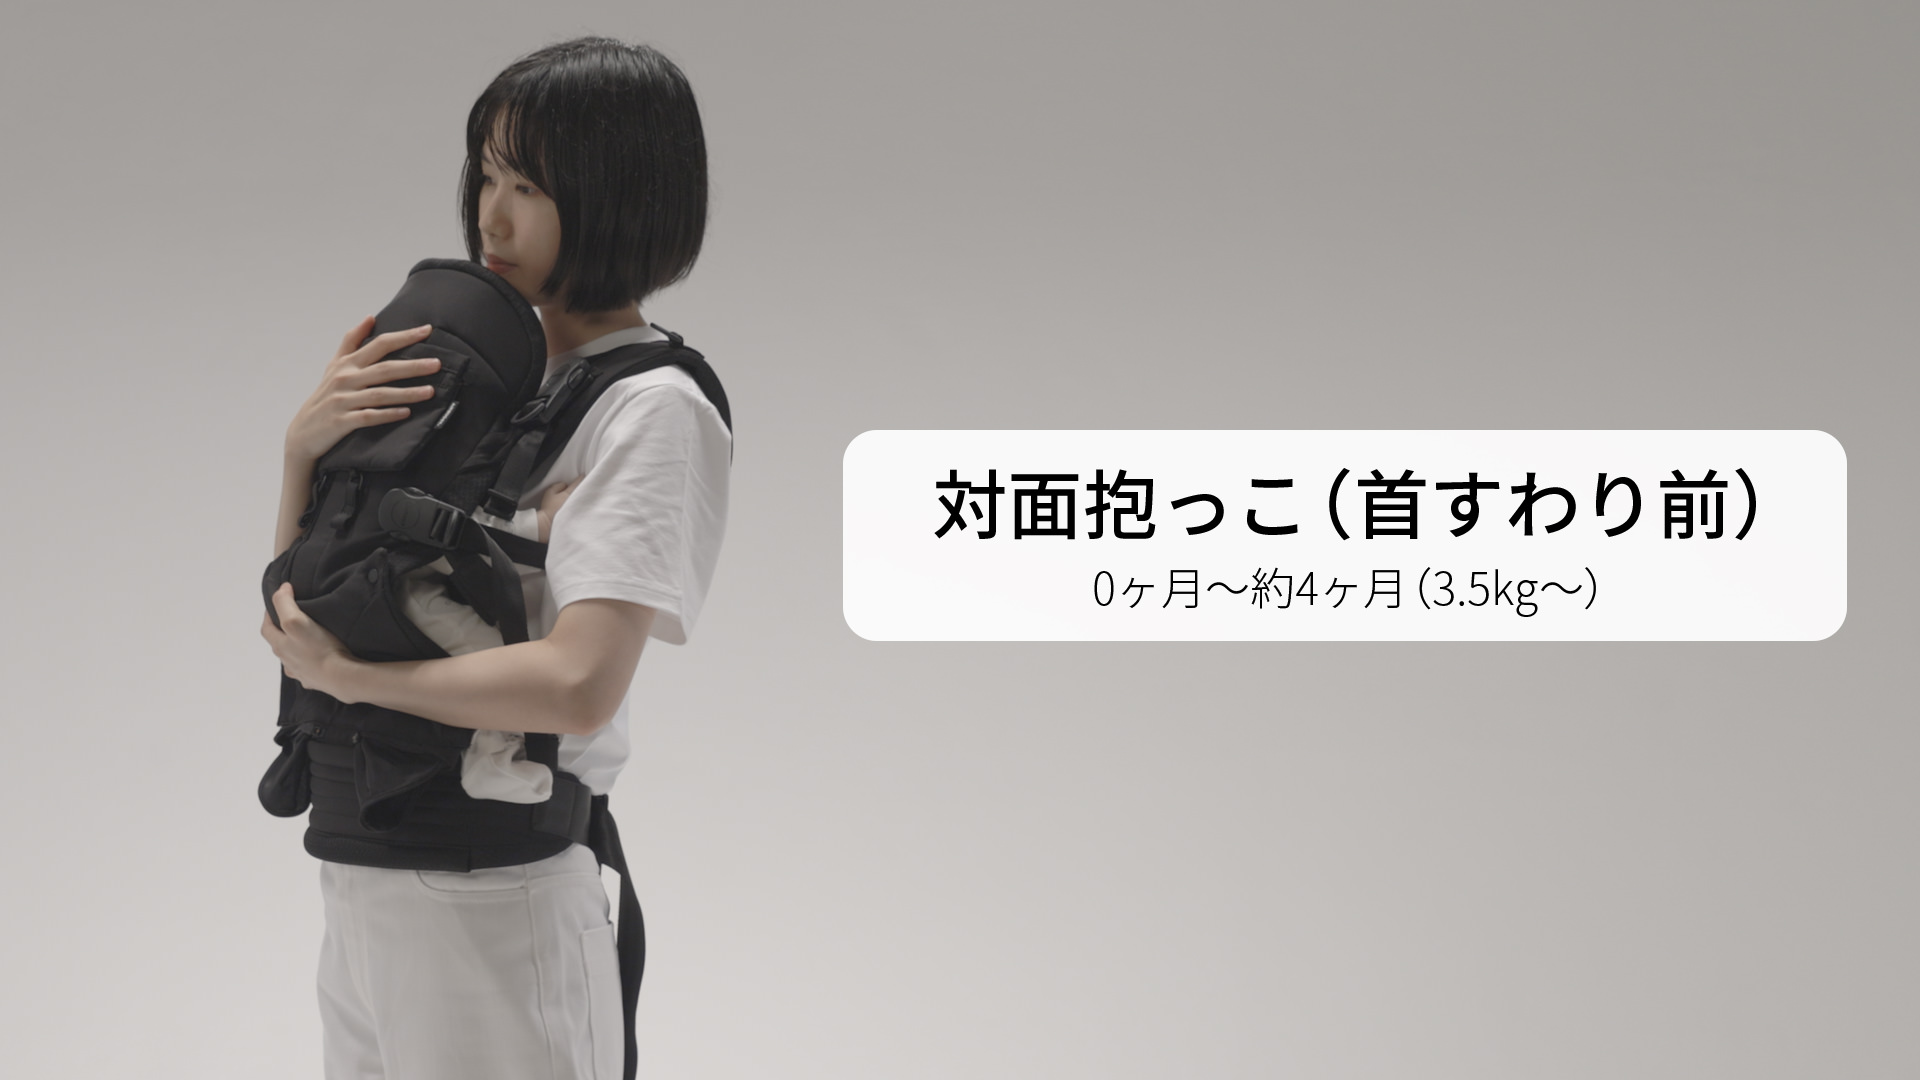 AIRBUGGY BABY CARRIER デビュー | AIRBUGGY | ベビーカーのエアバギー